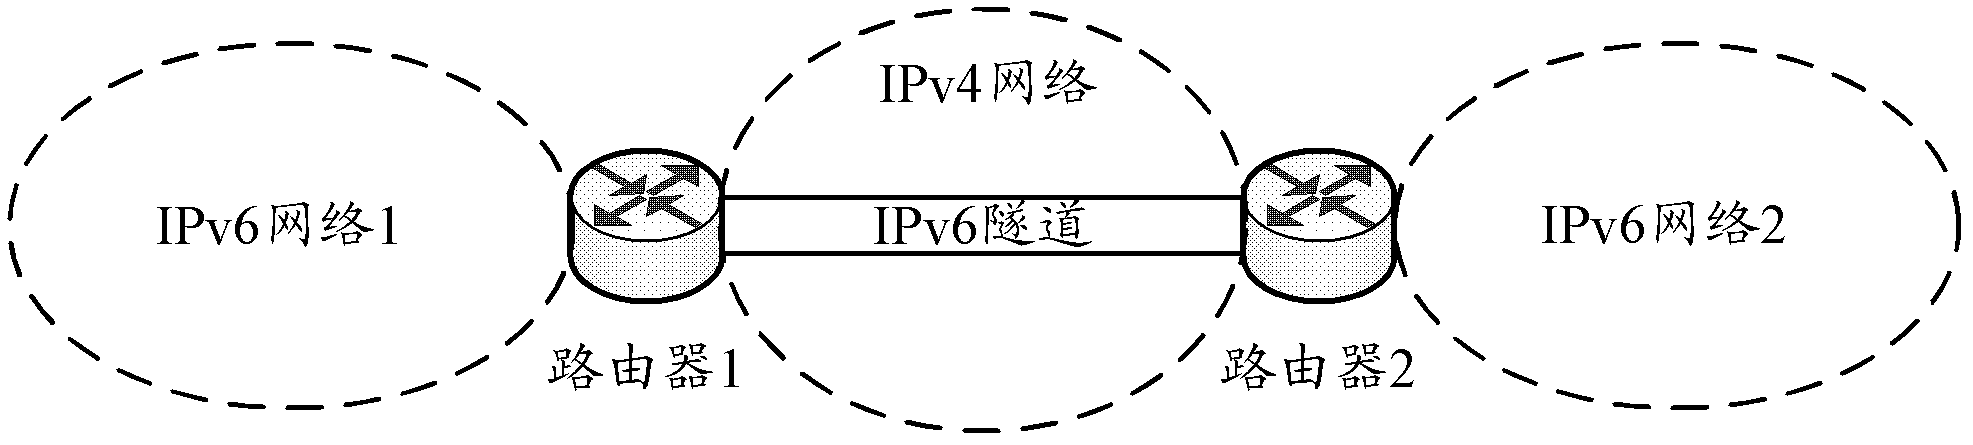 Method and device for detecting fault of internet protocol version 6 (IPv6) tunnel